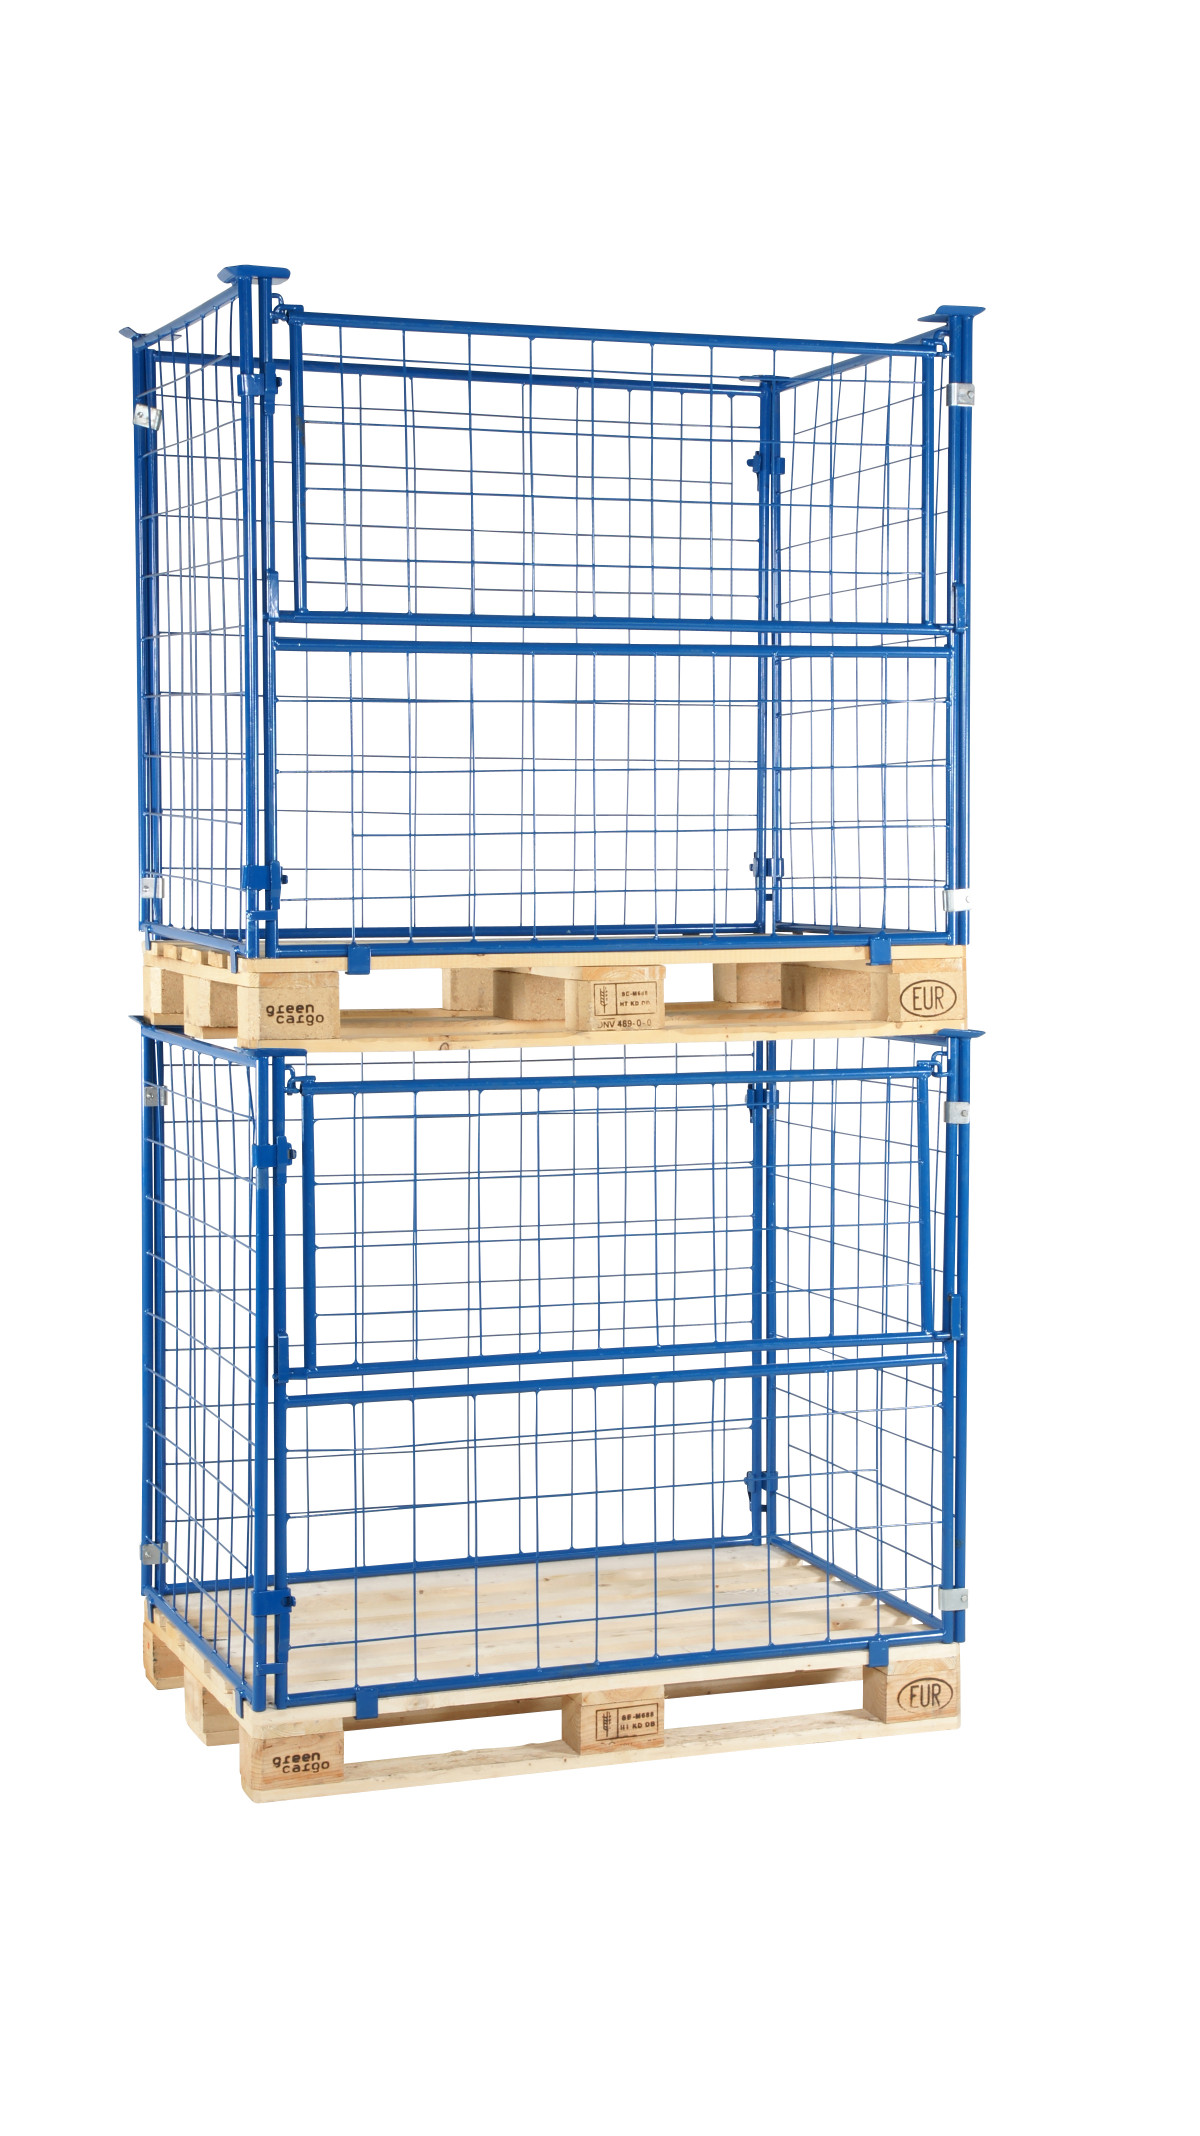 AK 216 pallet container for EURO pallets - Storit